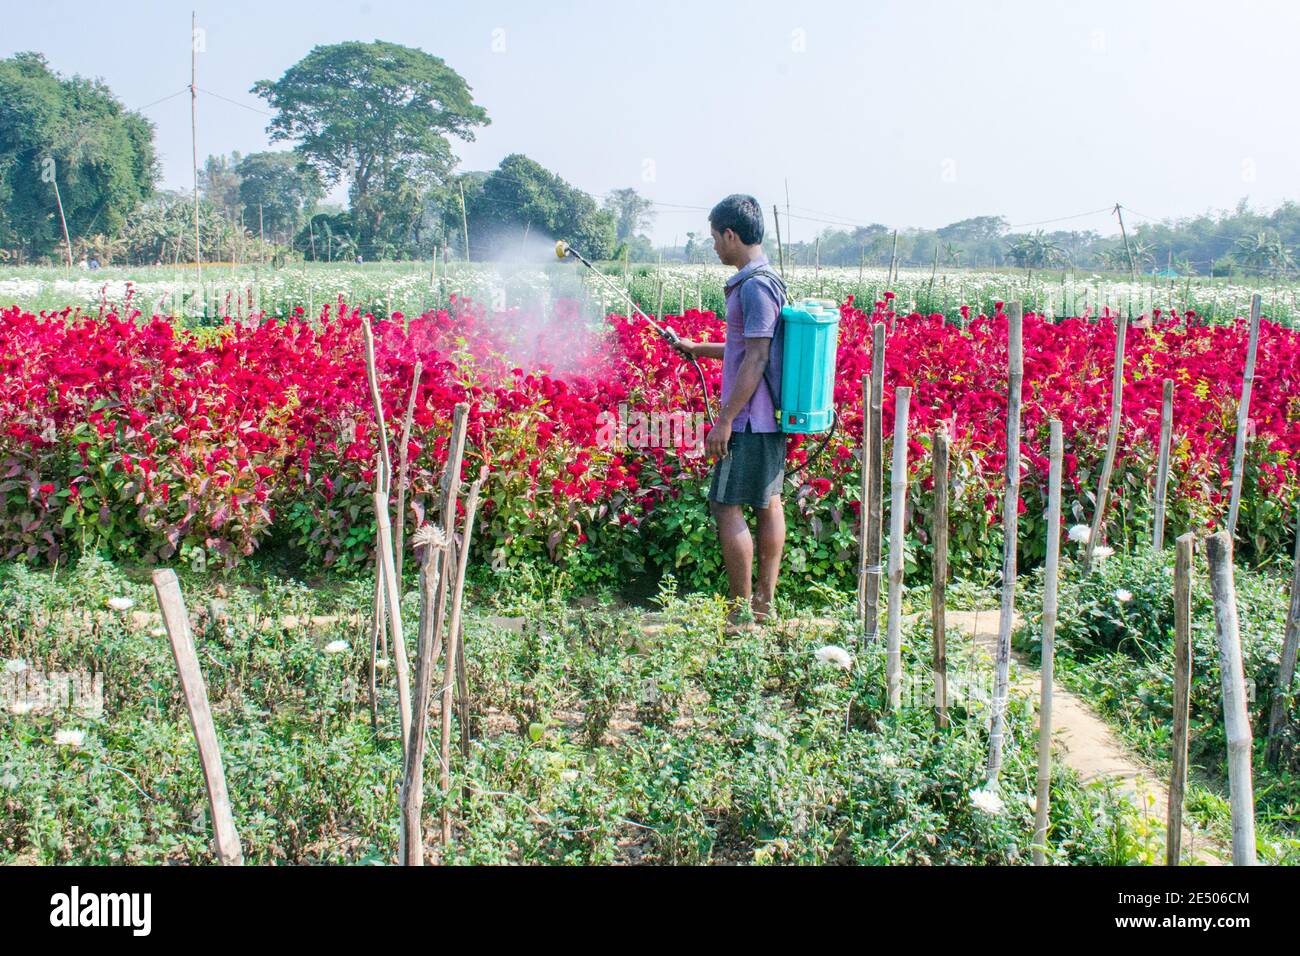 Picture of a flower field of rural Nadia. The farmer is spraying pesticide from sprayer in his flower field. Stock Photo